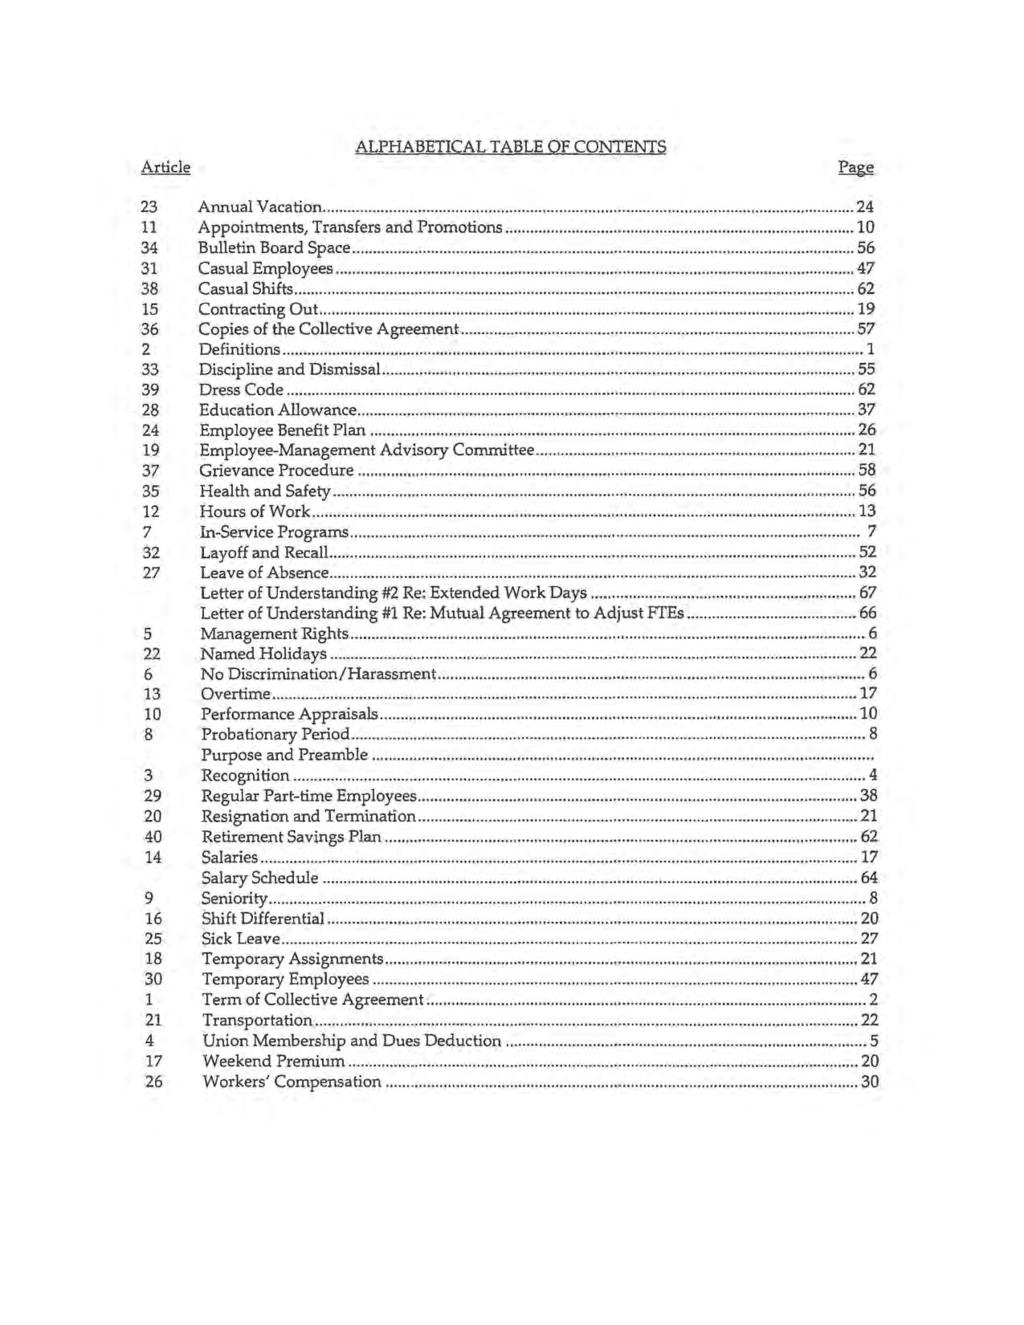 Article ALPHABETICAL TABLE OF CONTENTS Page 23 Annual Vacation... 24 11 Appointments, Transfers and Promotions... 10 34 Bulletin Board Space... 56 31 Casual Employees... 47 38 Casual Shifts.